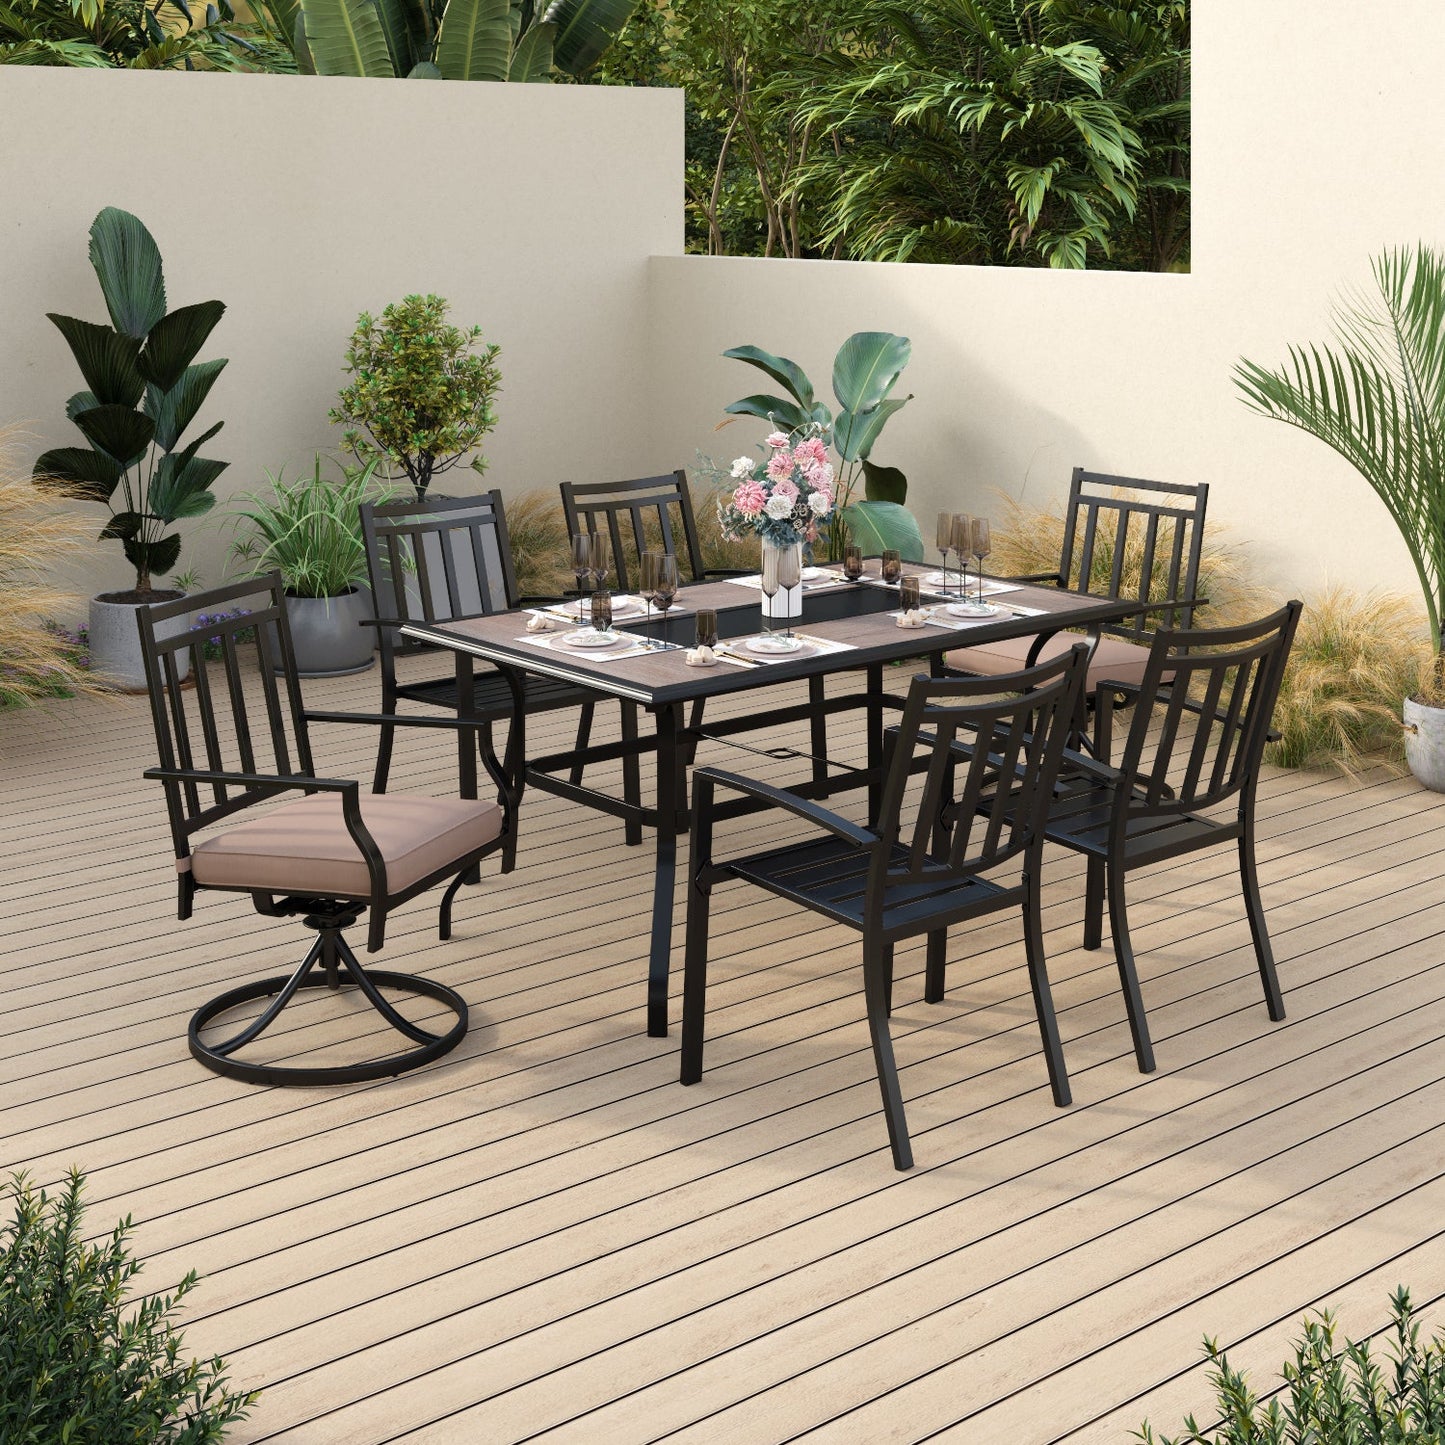 Sophia & William 7 Piece Outdoor Patio Dining Set 1 Retangular Table and 6 Metal Dining Chairs